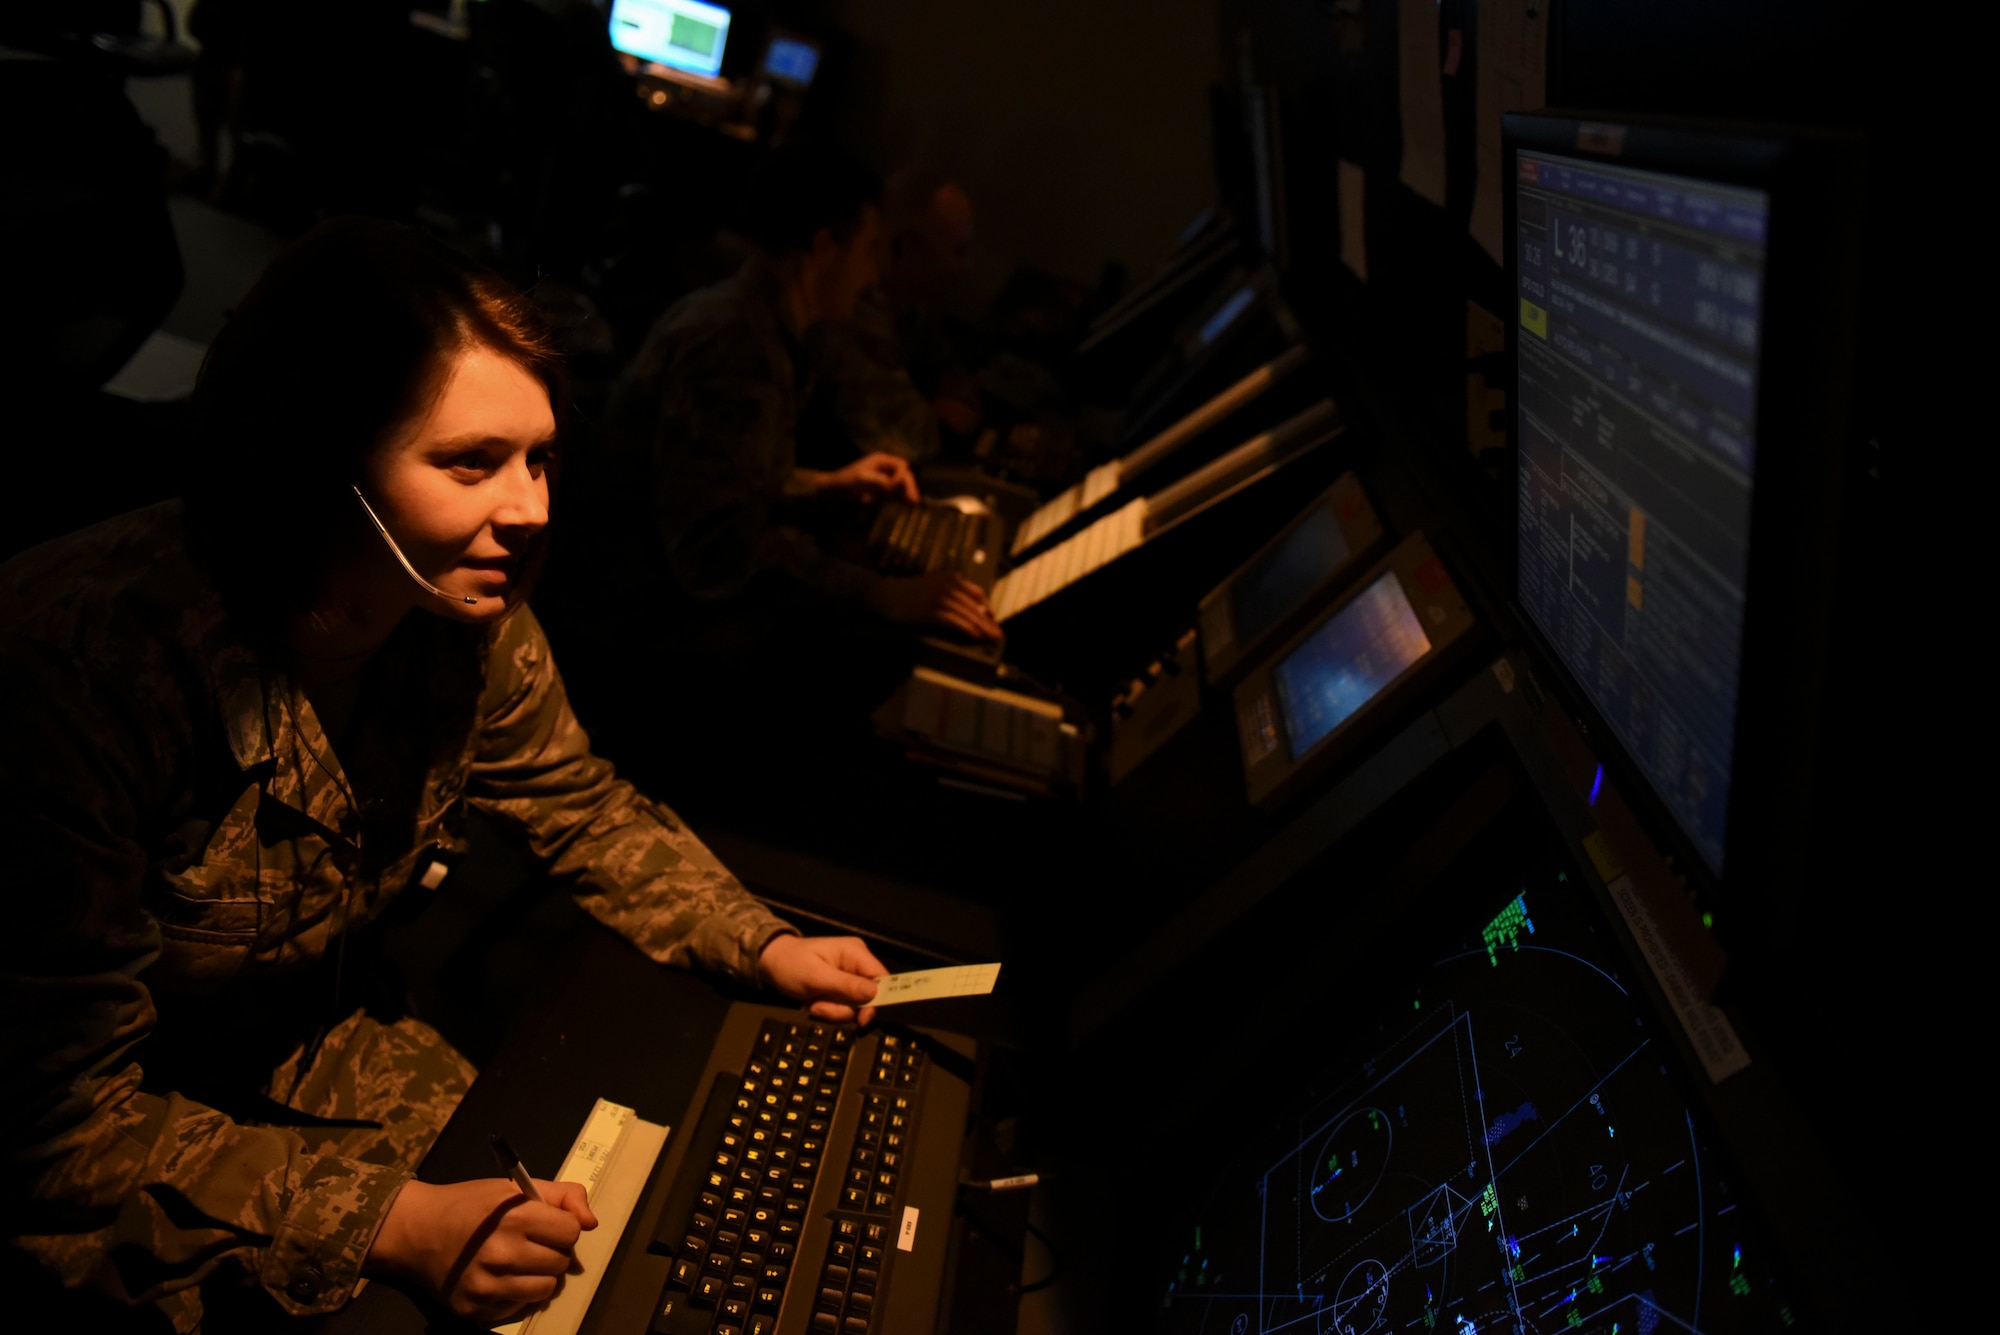 Senior Airman Justine King, 8th Operations Support Squadron air traffic controller, monitors the position of an aircraft on a radar screen at Kunsan Air Base, Republic of Korea, Jan. 5, 2017. Radar approach controllers are responsible for coordinating aircraft that fly within Kunsan’s airspace. (U.S. Air Force photo by Senior Airman Michael Hunsaker/Released)